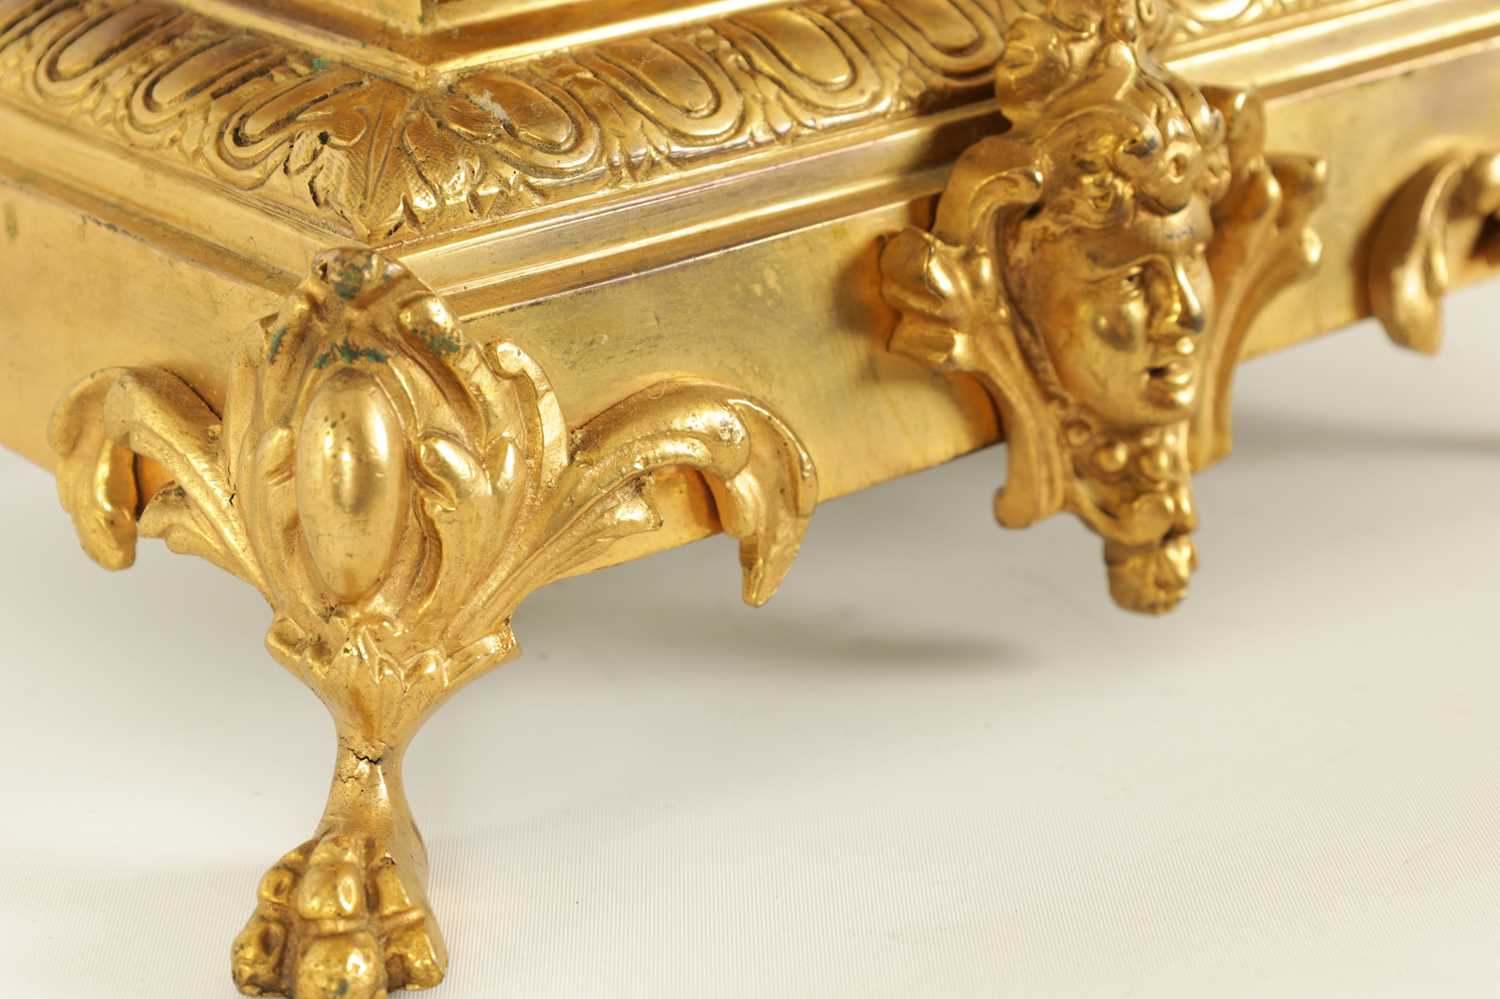 RICHOND. A LATE 19TH CENTURY FRENCH ORMOLU MANTEL CLOCK - Image 6 of 9